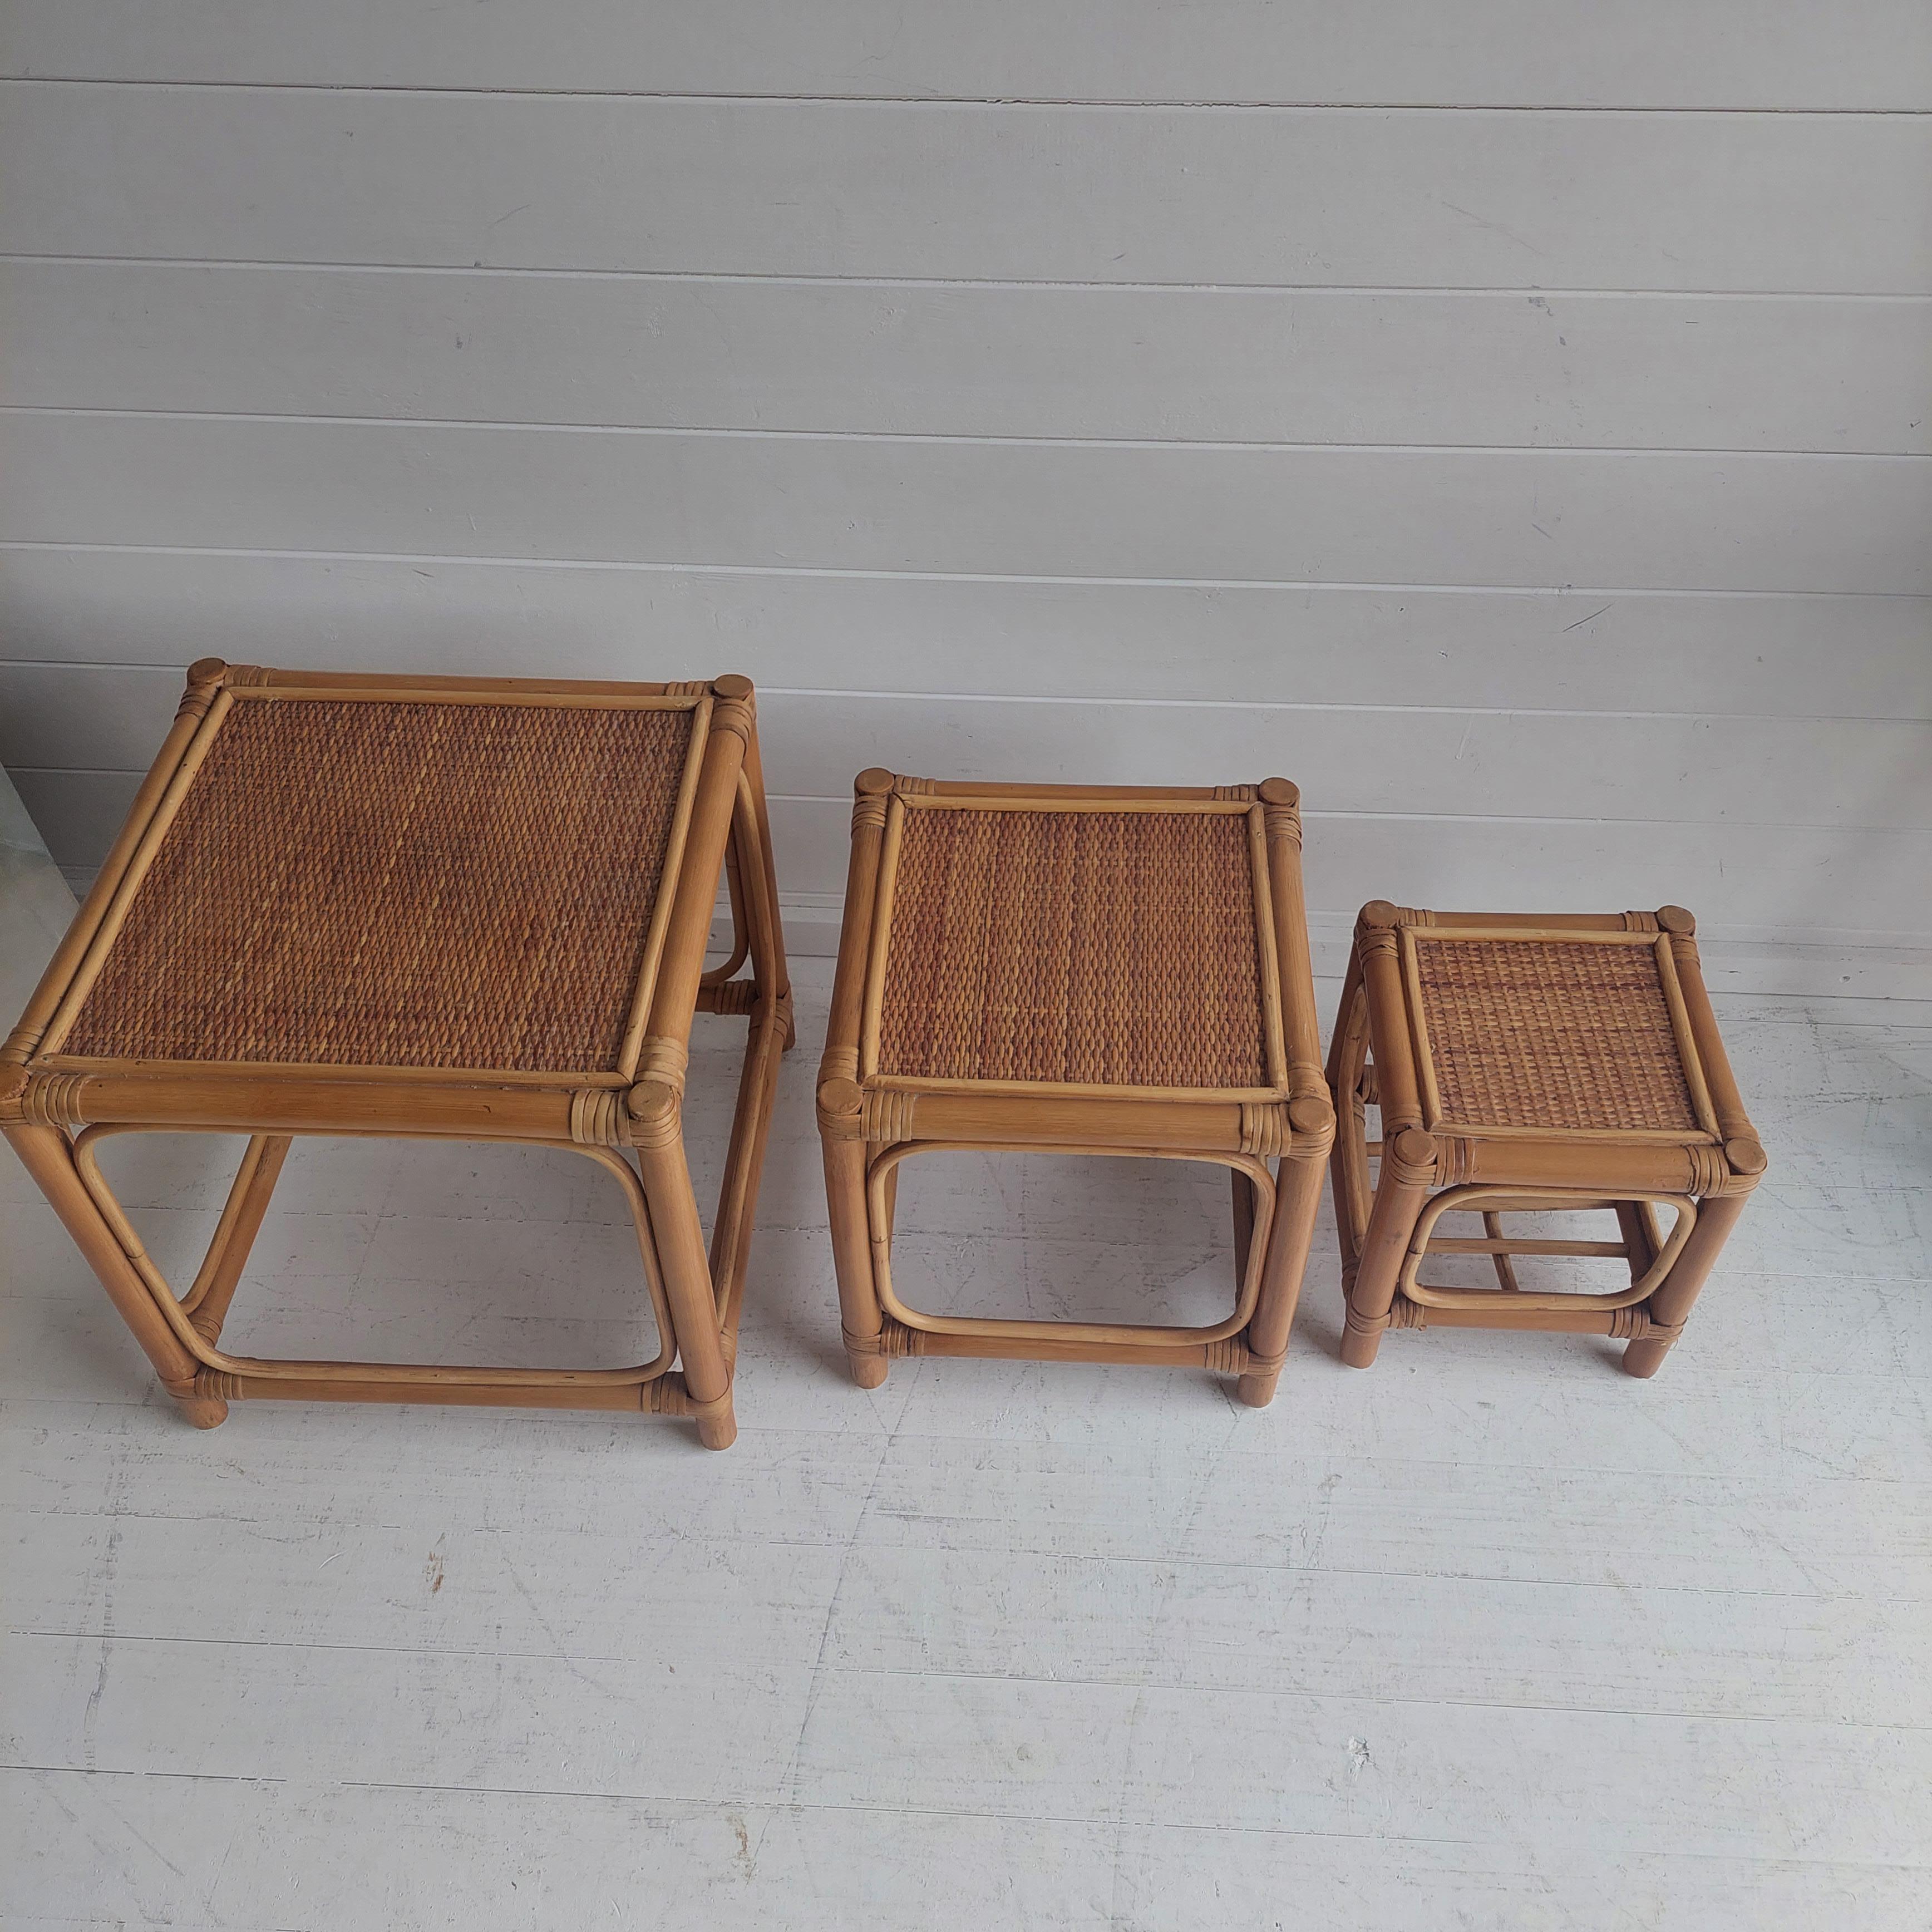 European Mid Century Bamboo Cube Nest of Tables Rattan Cane, 196-70s